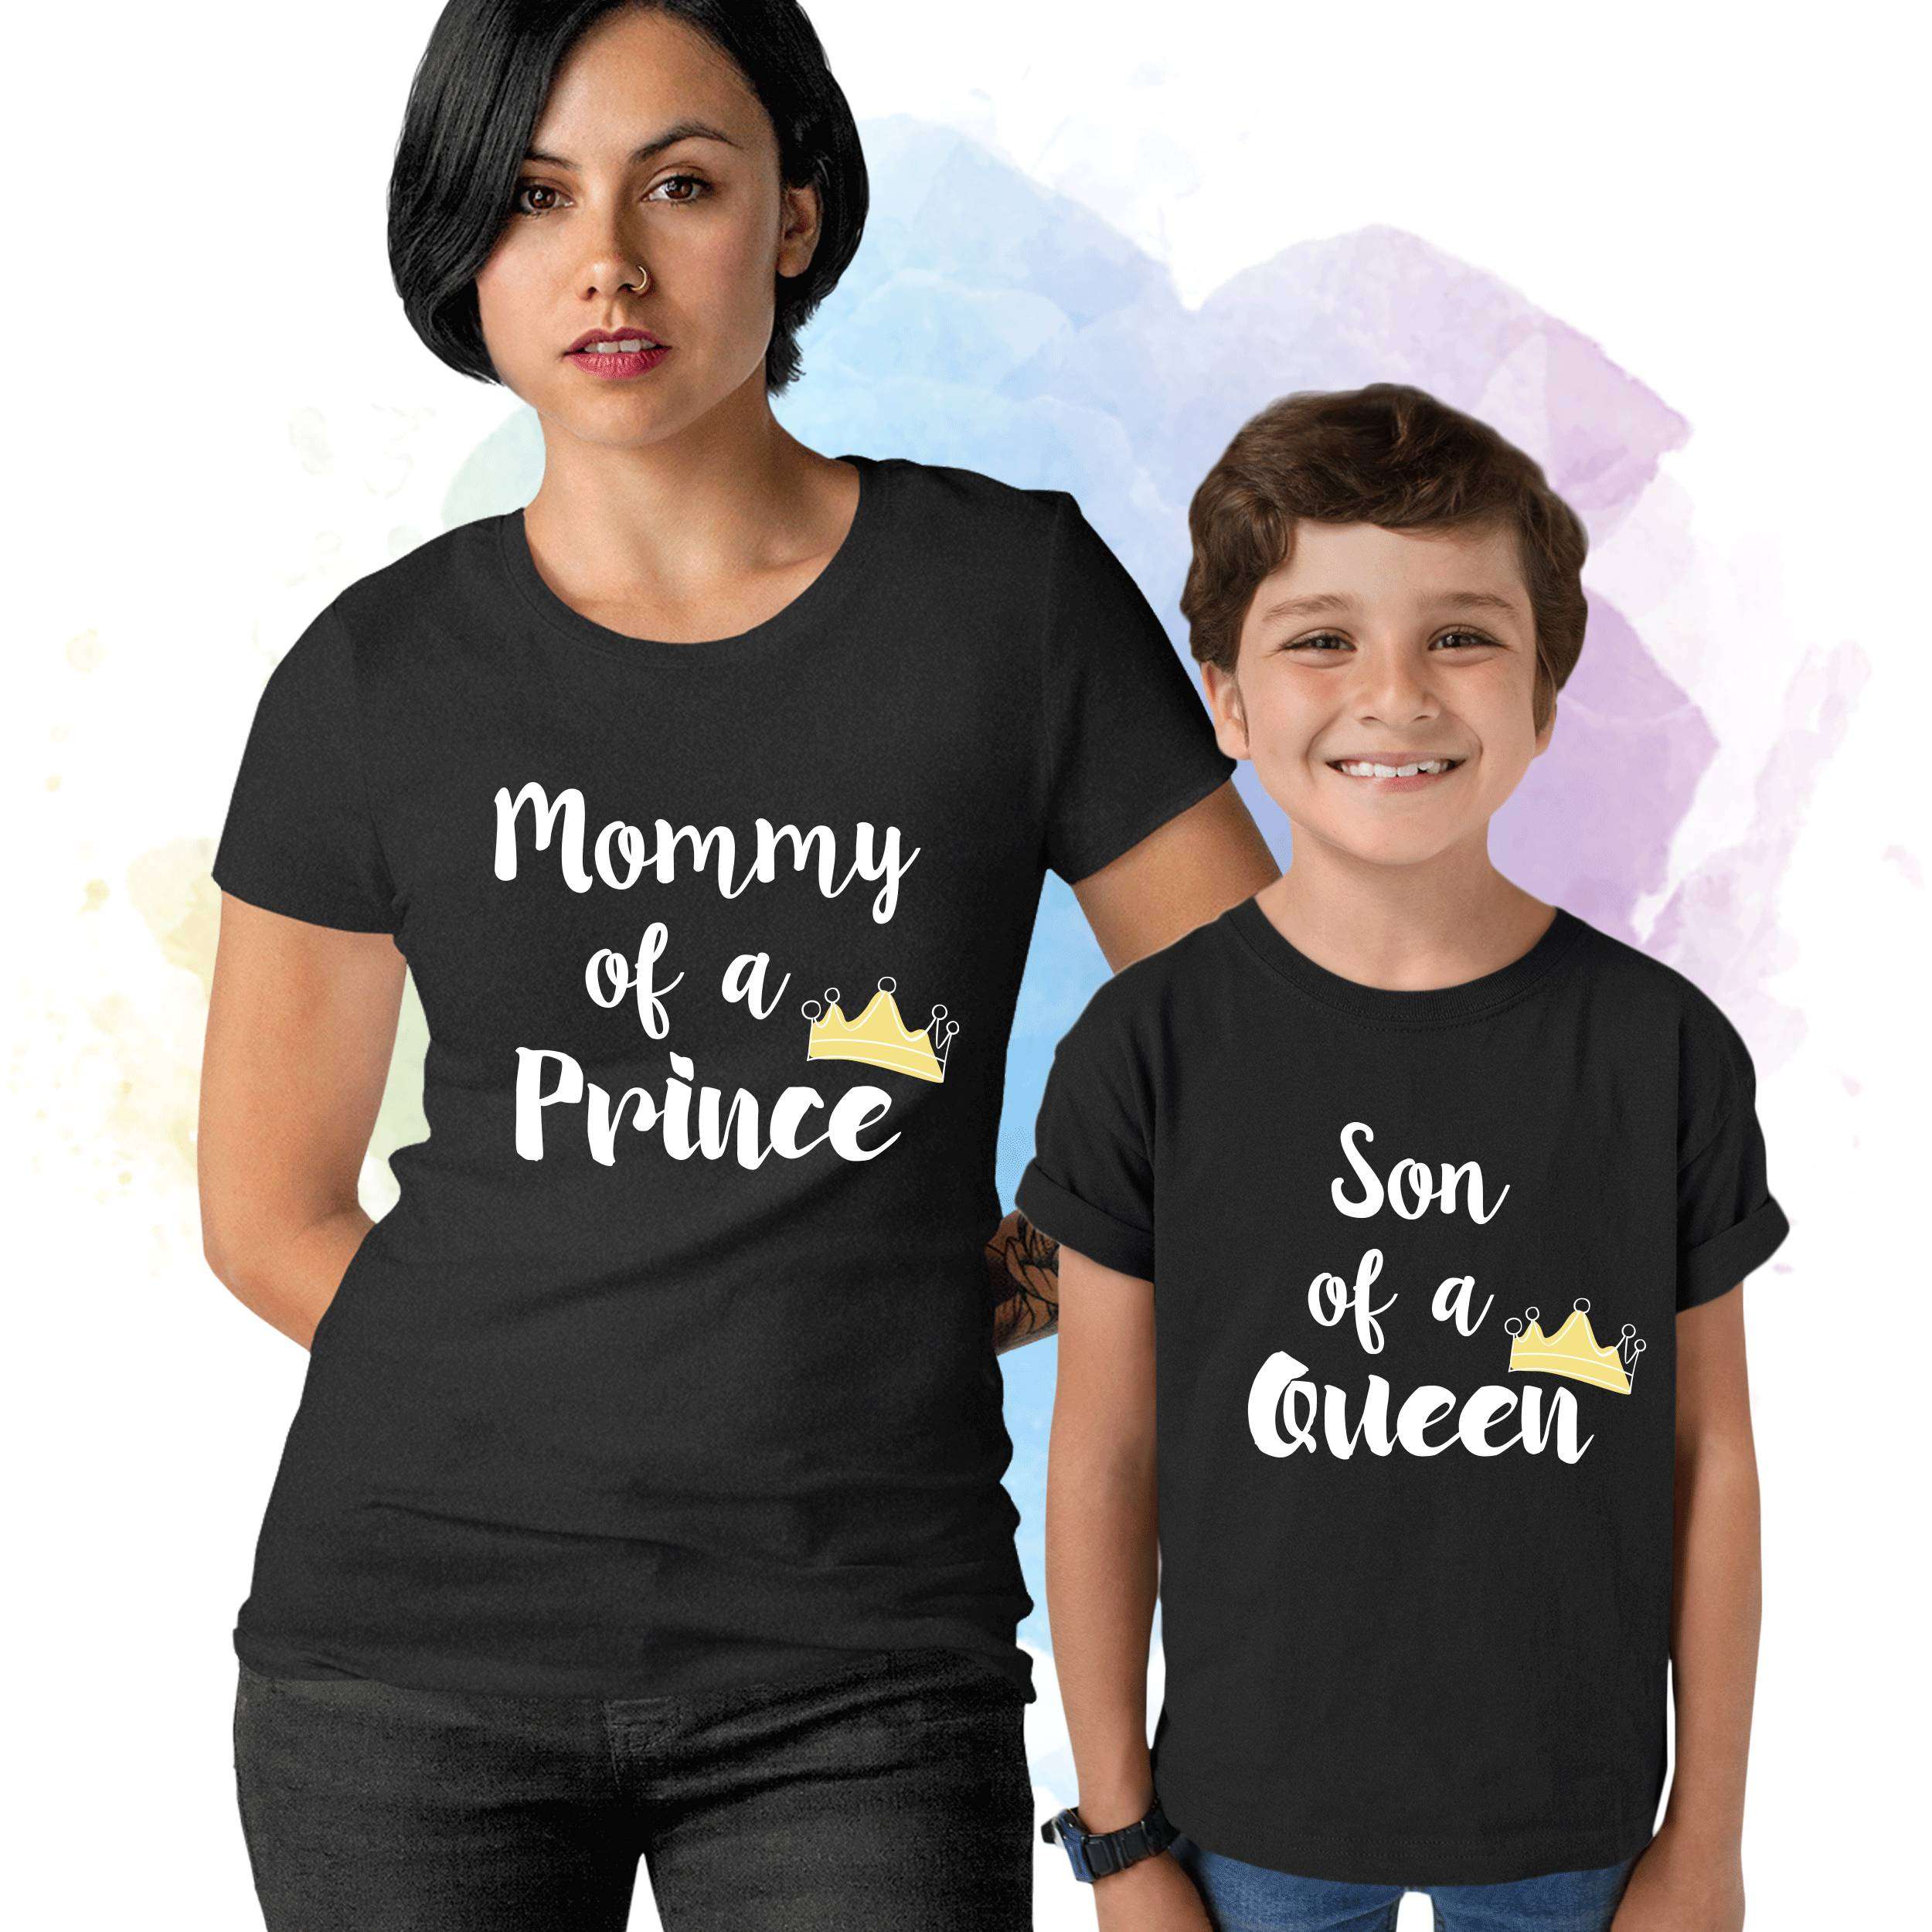 Mommy Son Matching Shirts, Mommy of a Prince, Son of a Queen.